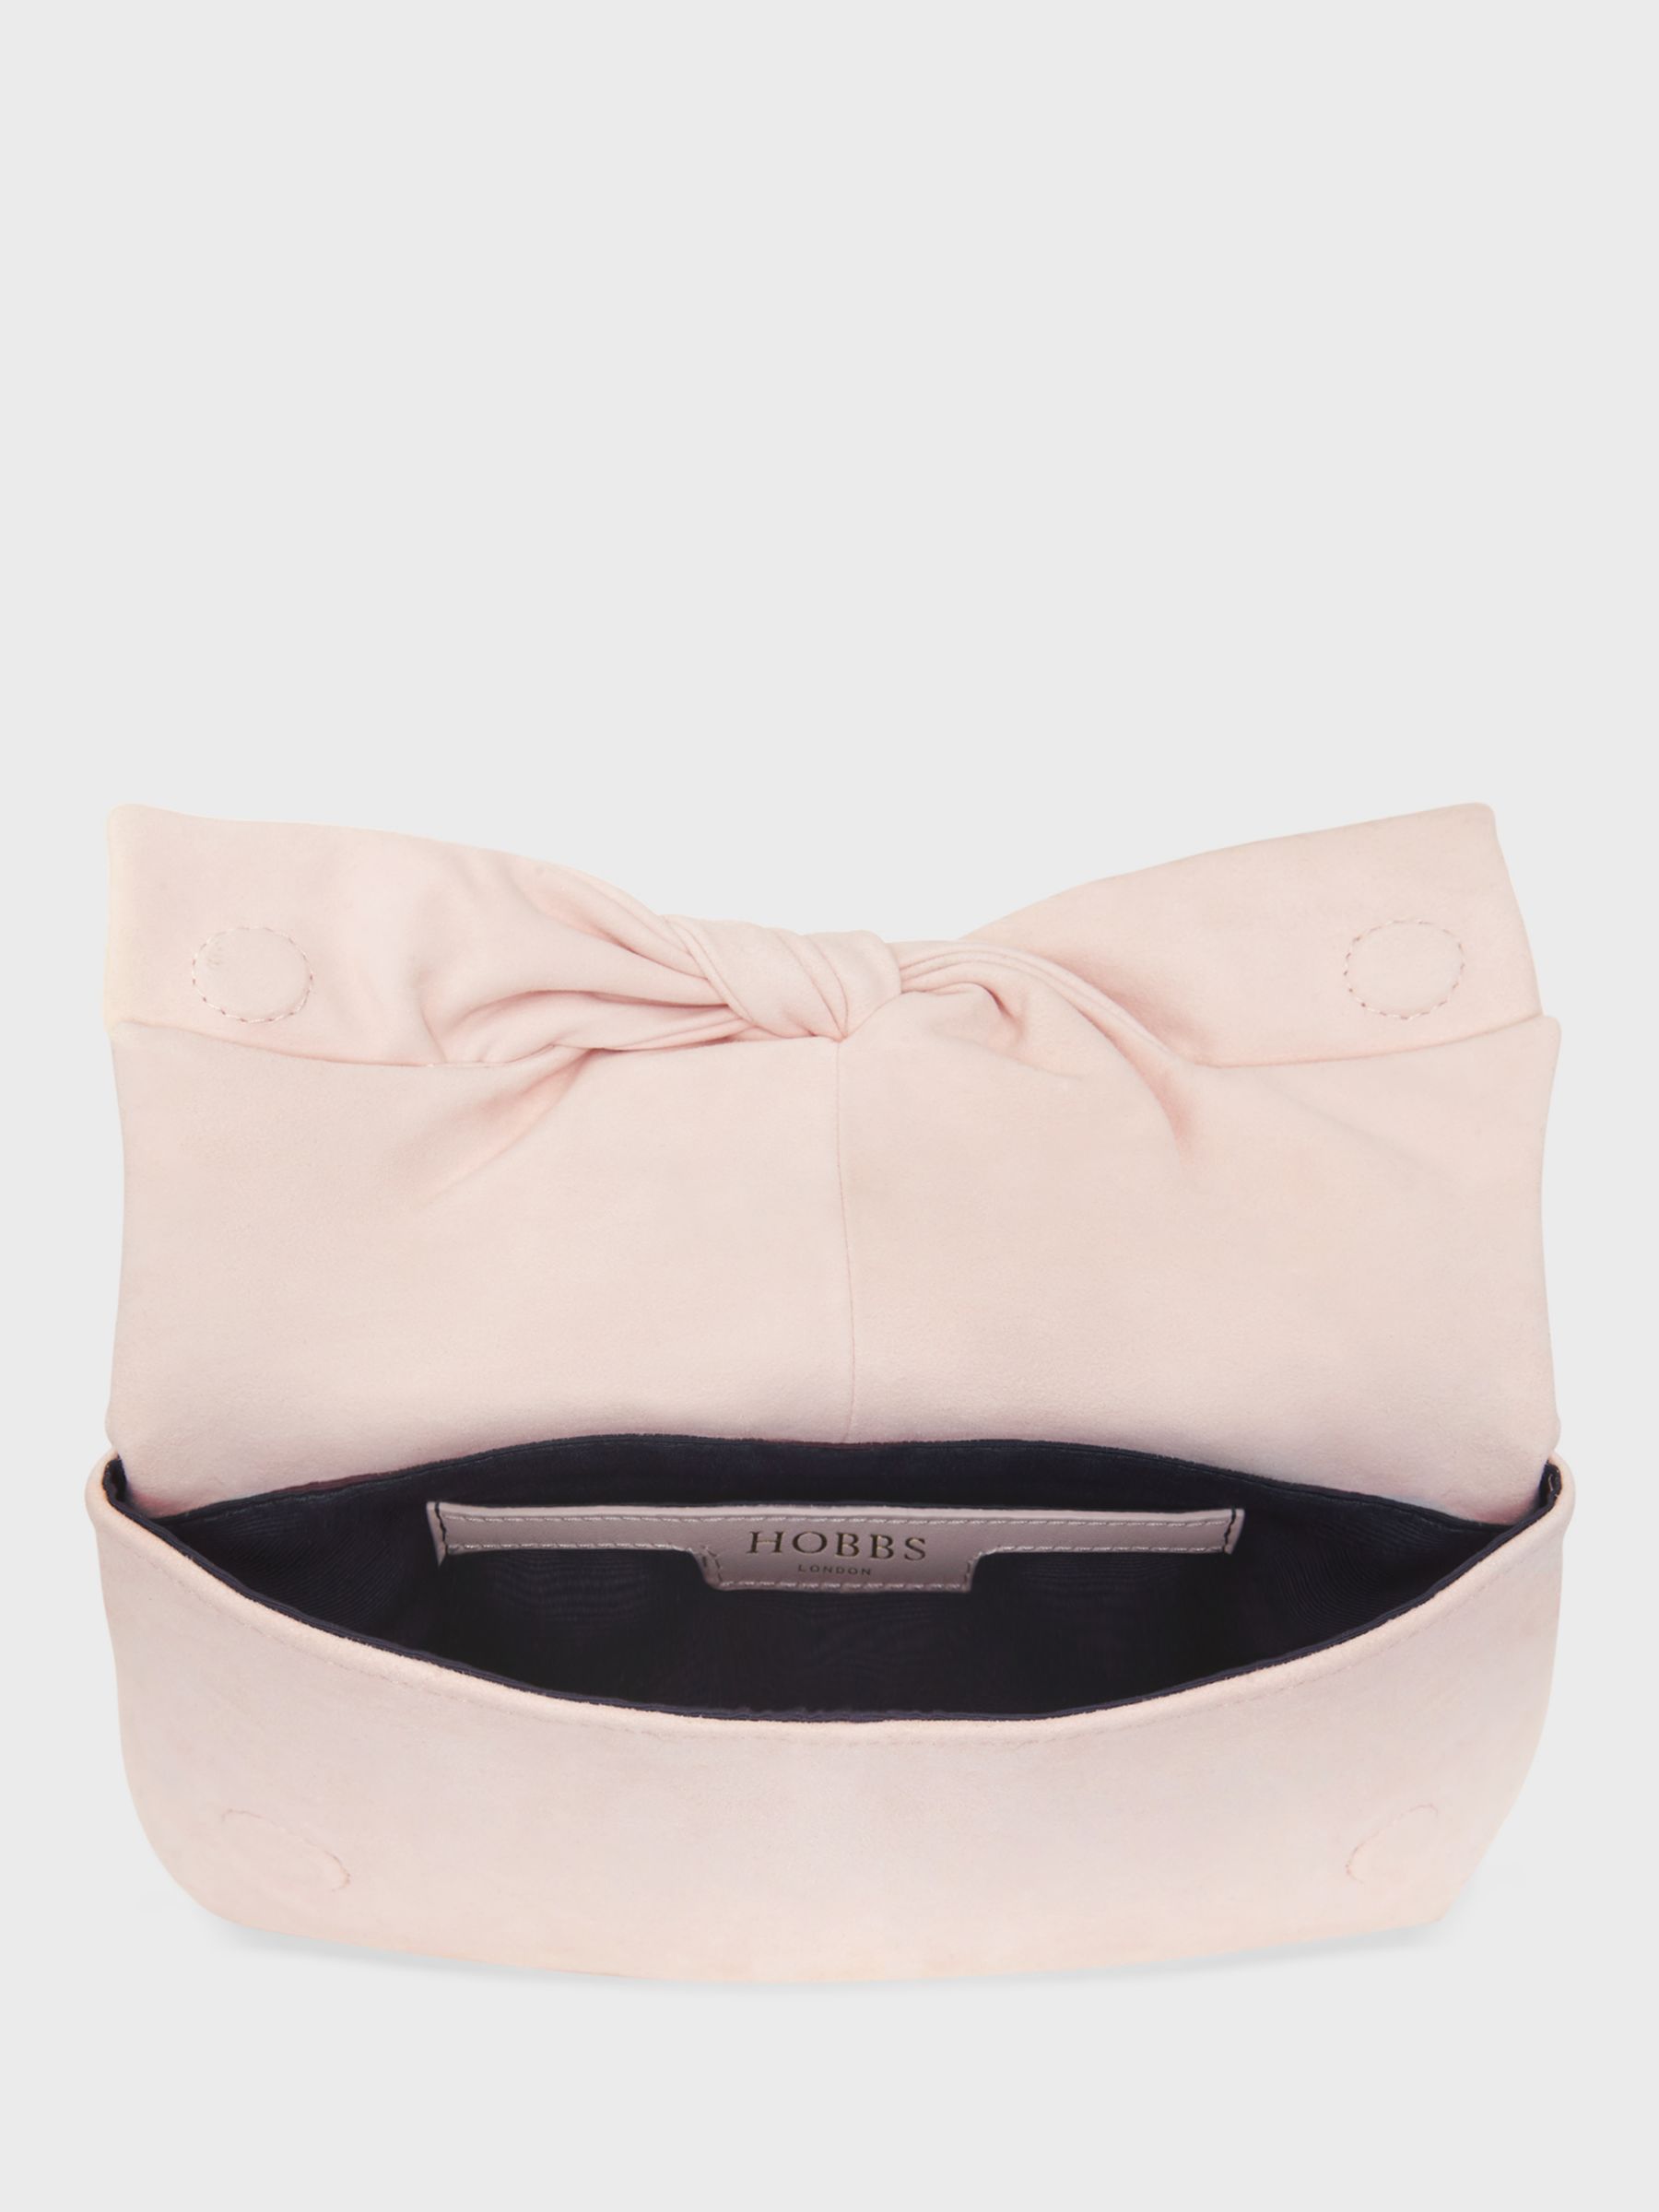 Buy Hobbs Milly Bow Clutch Bag, Bright Pink Online at johnlewis.com